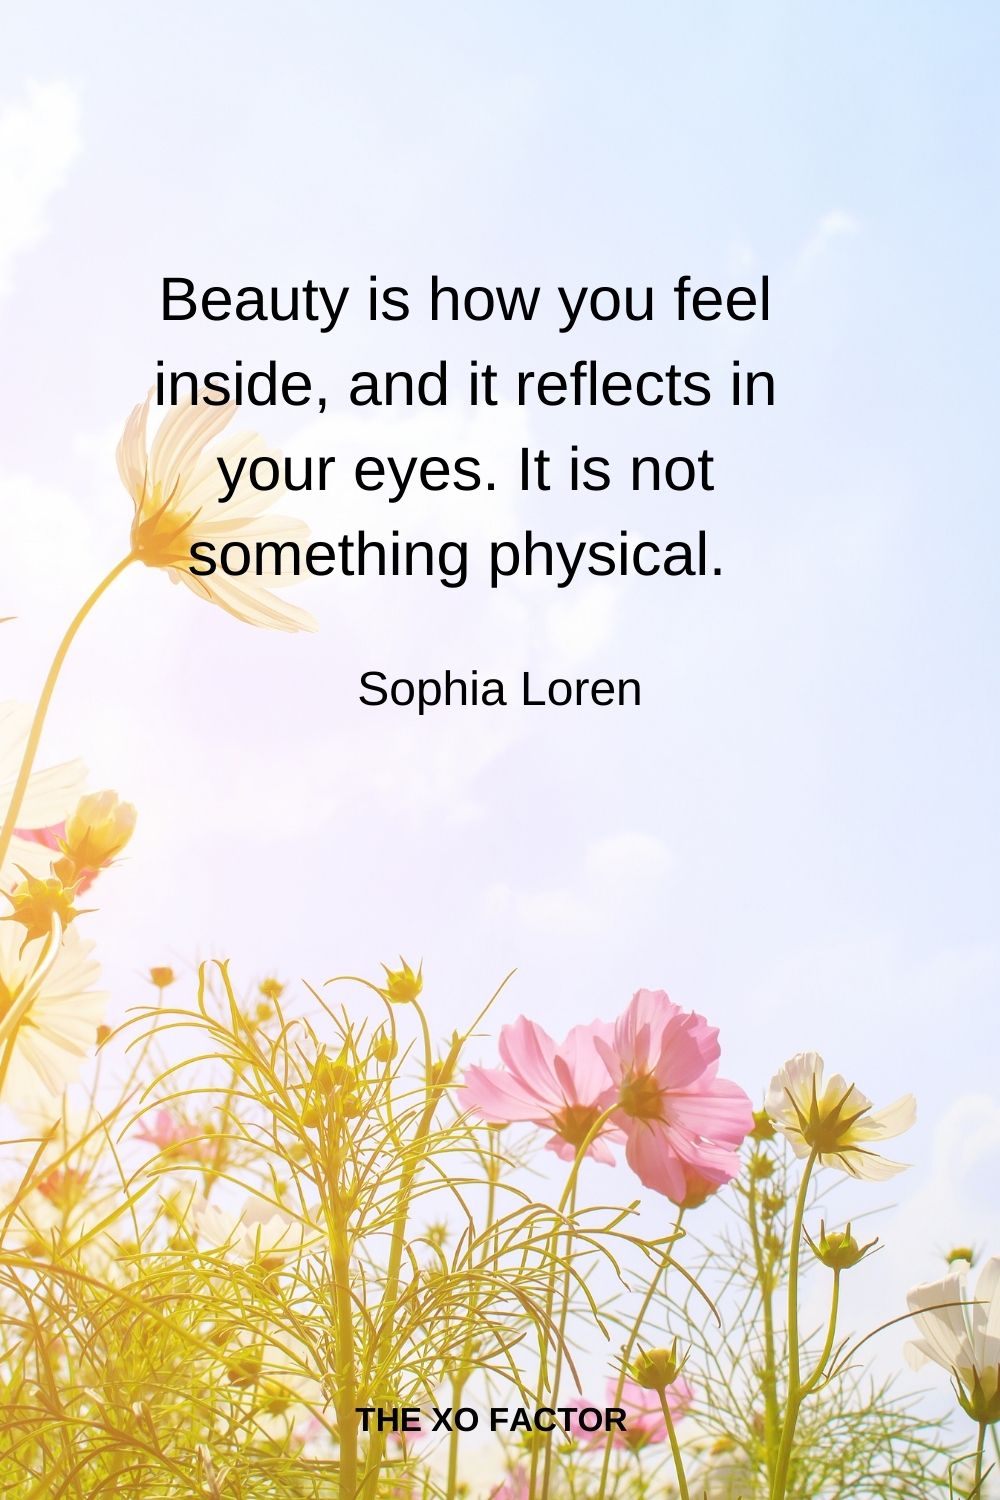 Beauty is how you feel inside, and it reflects in your eyes. It is not something physical.  Sophia Loren